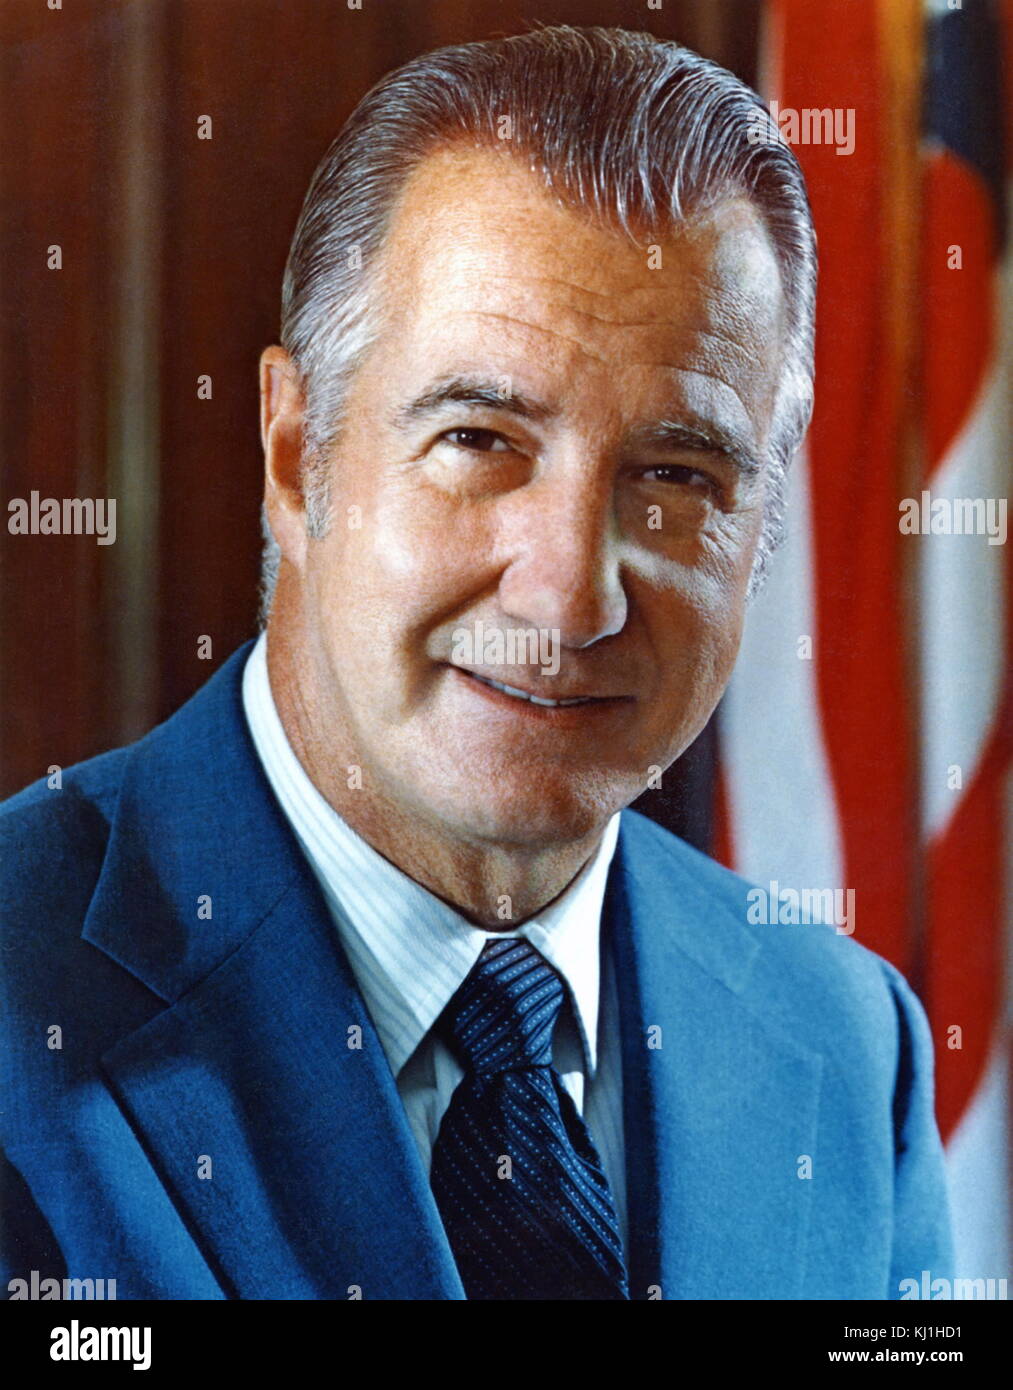 Spiro Theodore Agnew ( 1918 – 1996) American politician who served as the 39th Vice President of the United States from 1969 to 1973, under President Richard Nixon. Stock Photo